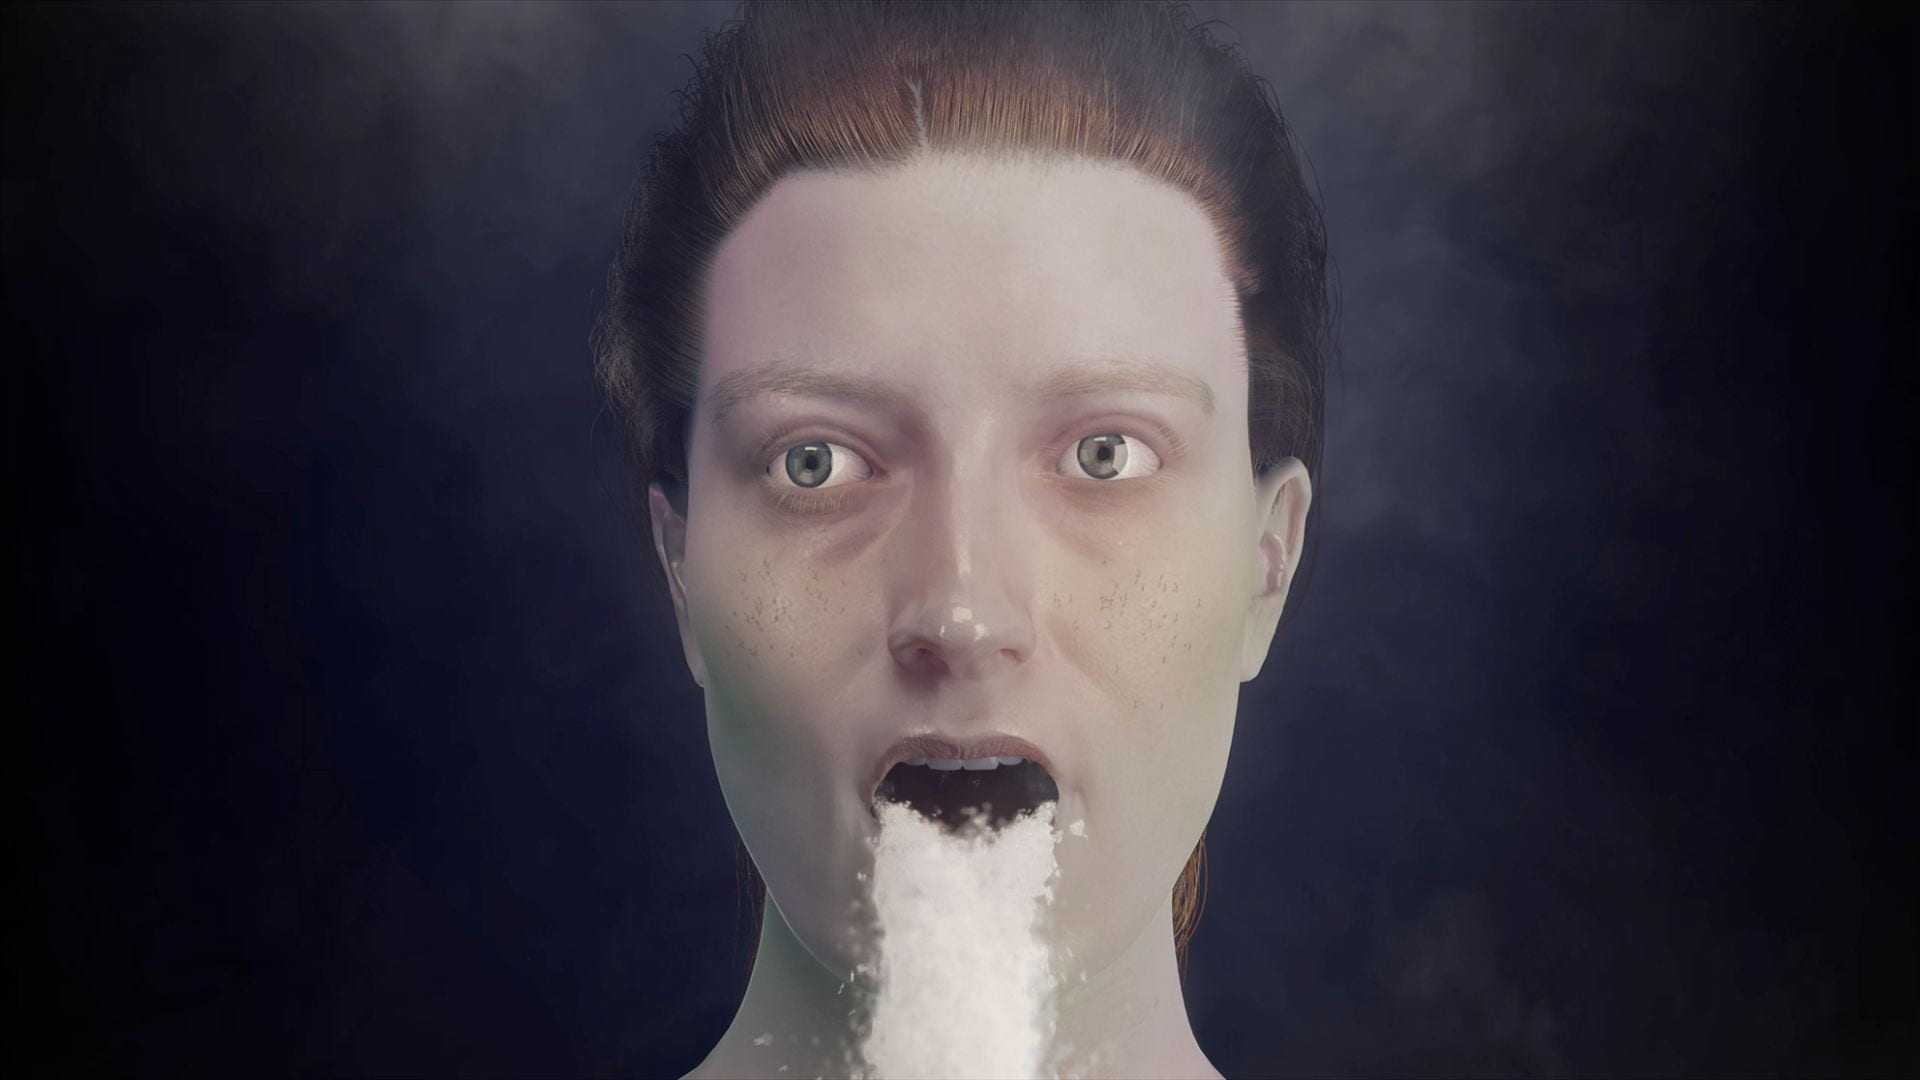 An 3D animated image of a woman's face. Her hair is pulled back and a torrent of liquid is falling from her open mouth.